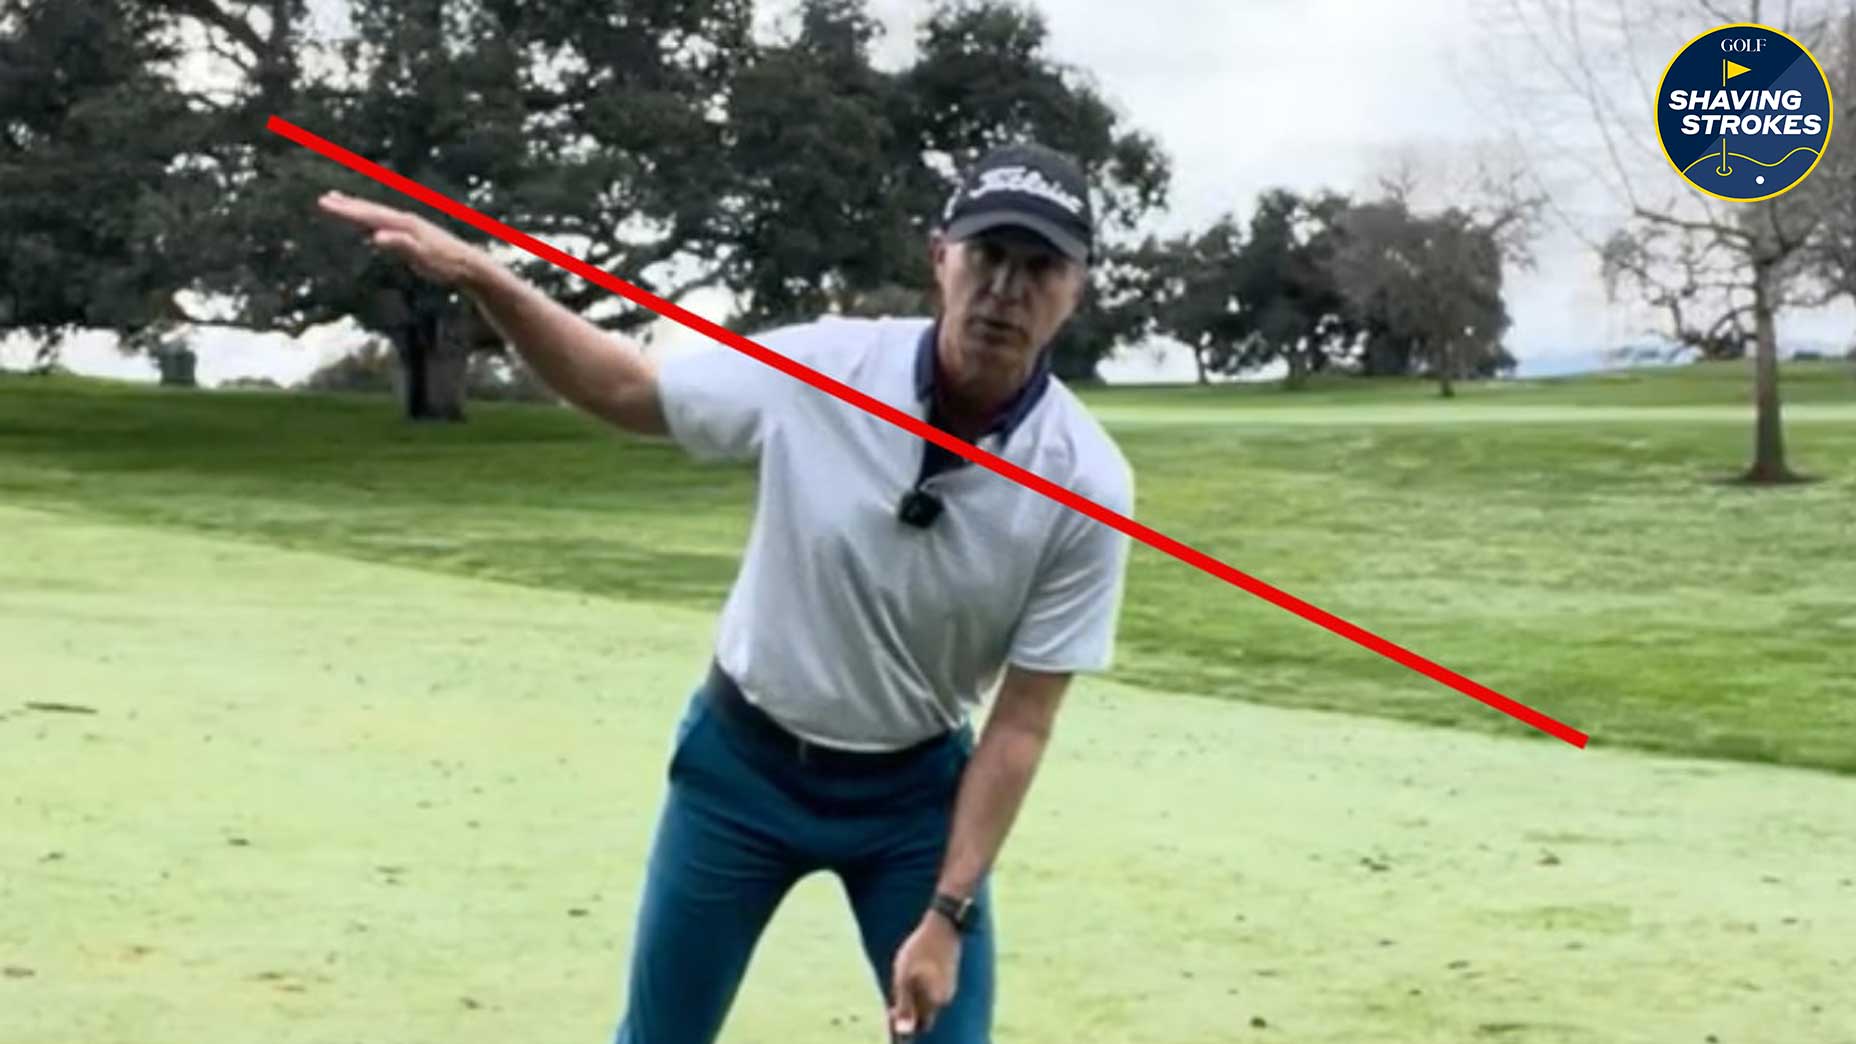 When dealing with a downhill lie in golf, don't guess on how to hit the shot, use these tips from GOLF Top 100 Teacher Josh Zander instead